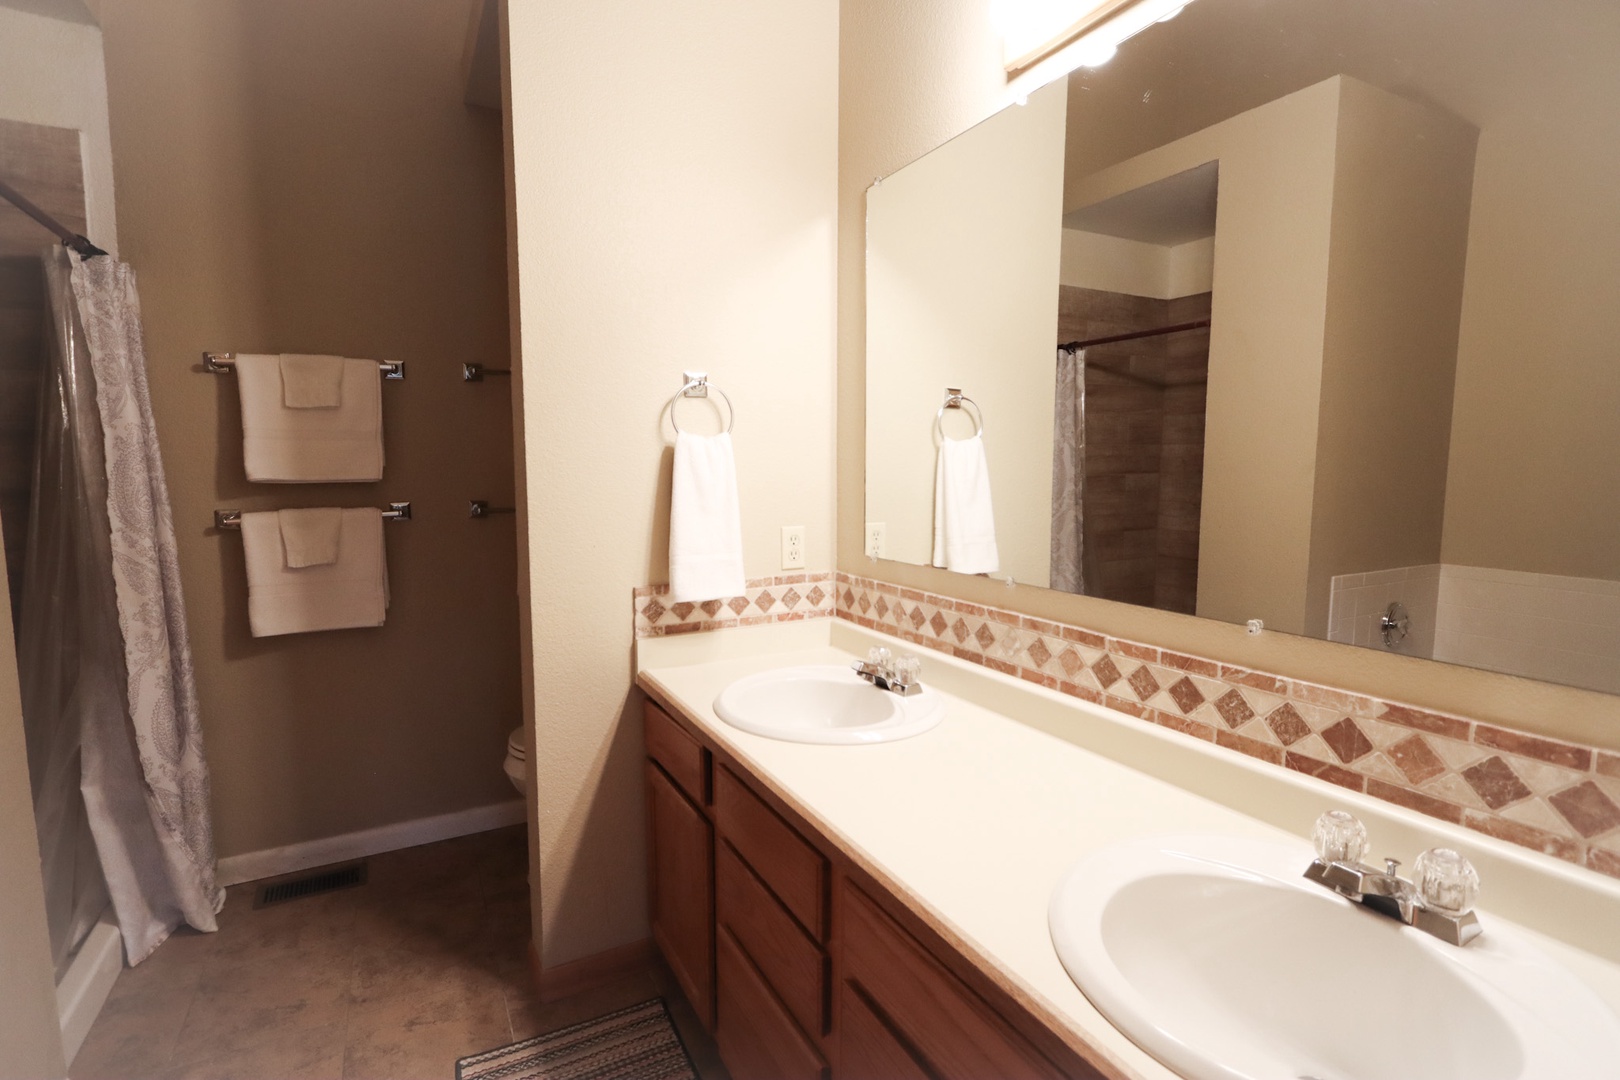 The private full bath off the loft includes a double vanity & walk-in shower